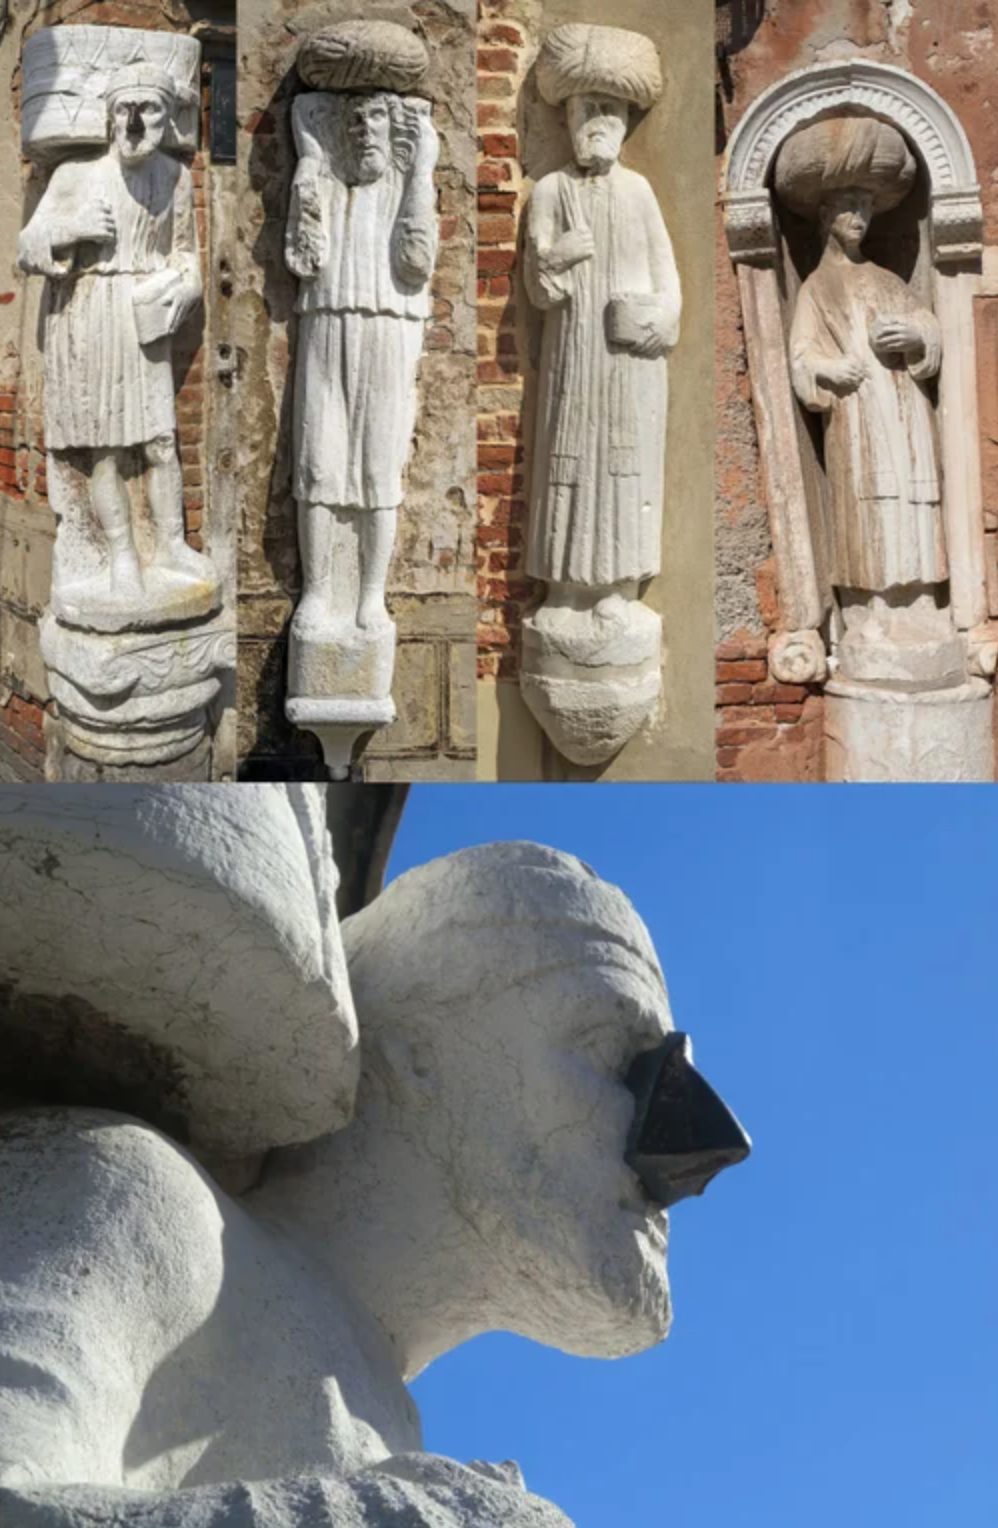 fascinating artifacts - 4 statues in Venice, made in the 1300s, representing 3 Greek brothers, who came to Venice in 1112 as merchants, and their slave. In the 1800s, one of the statues lost its nose and was replaced with a piece of iron. From that time o